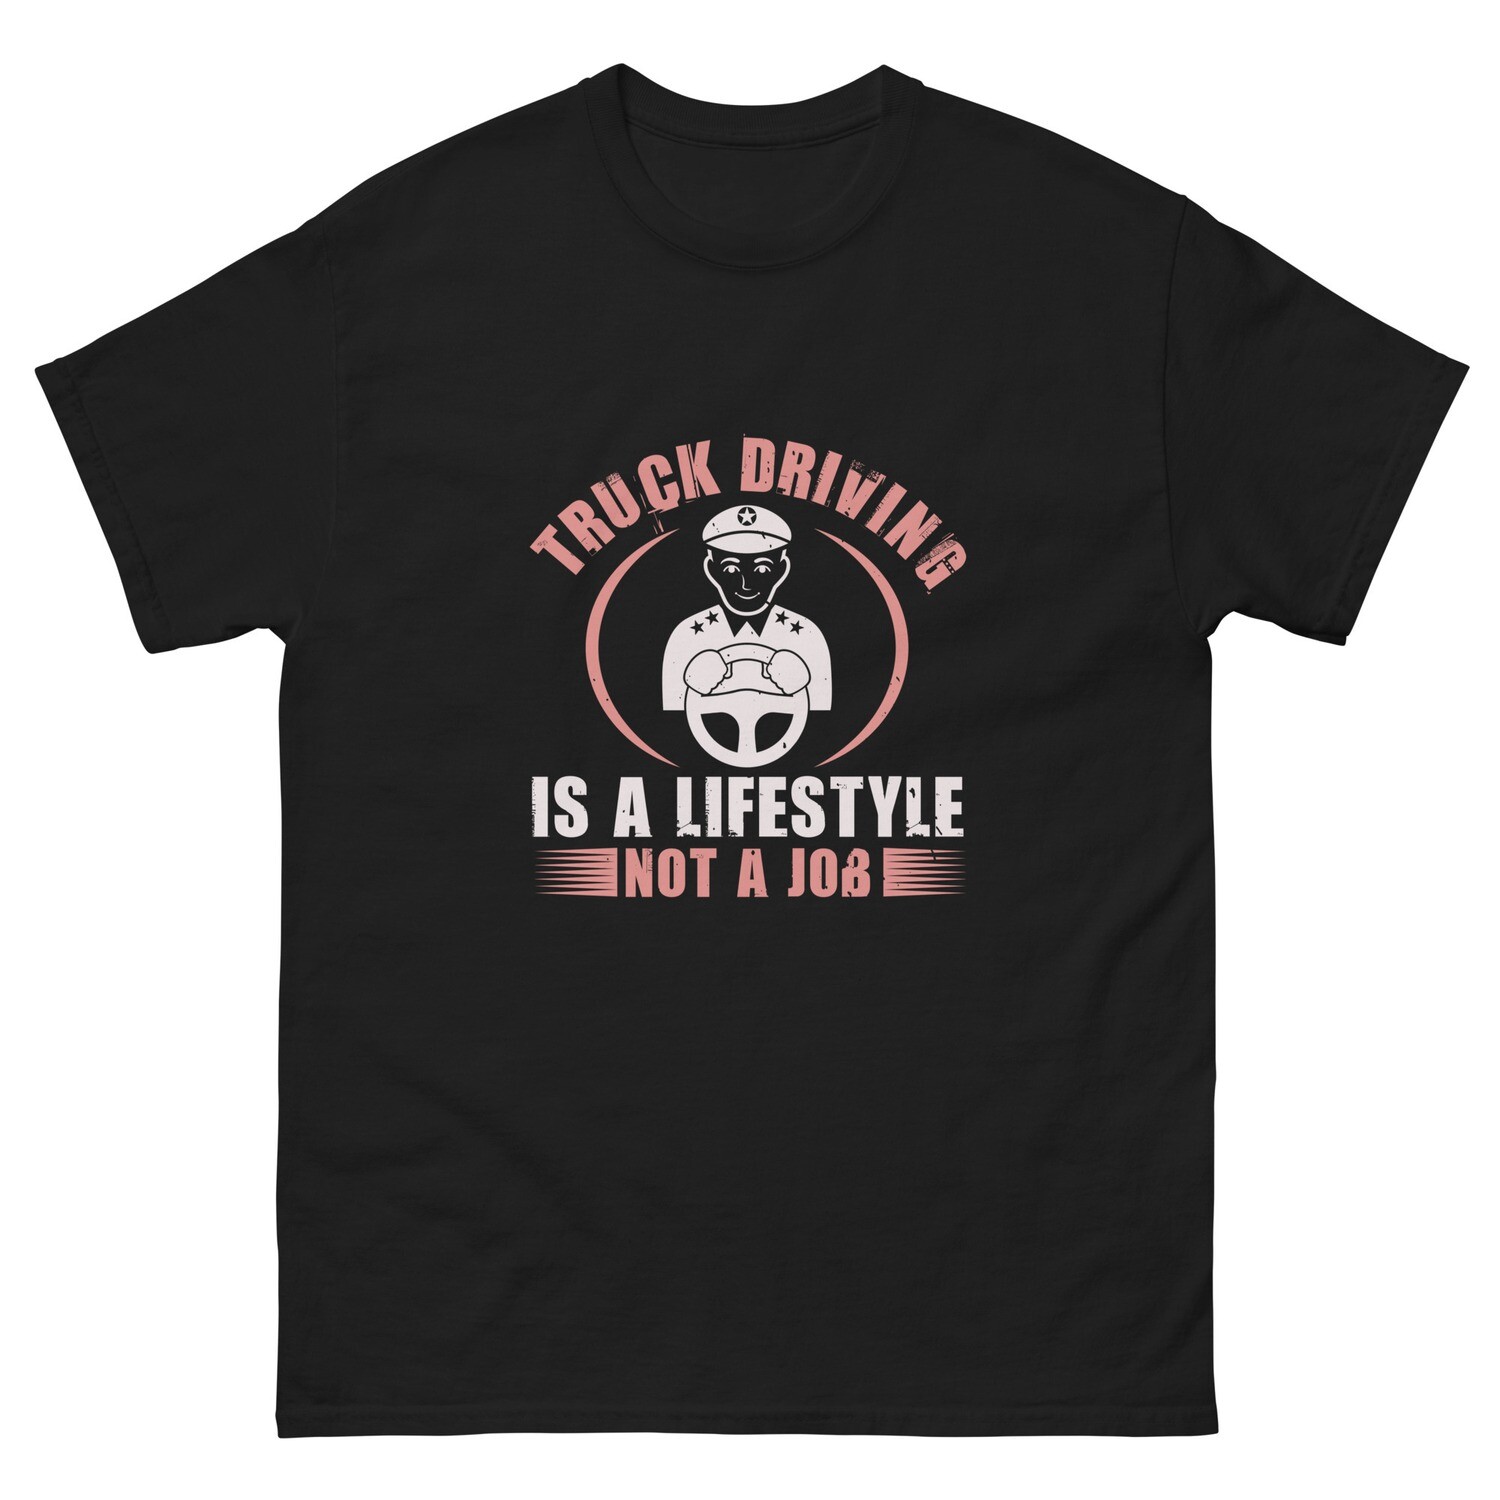 Freight Boss Lifestyle Men's Classic Tee